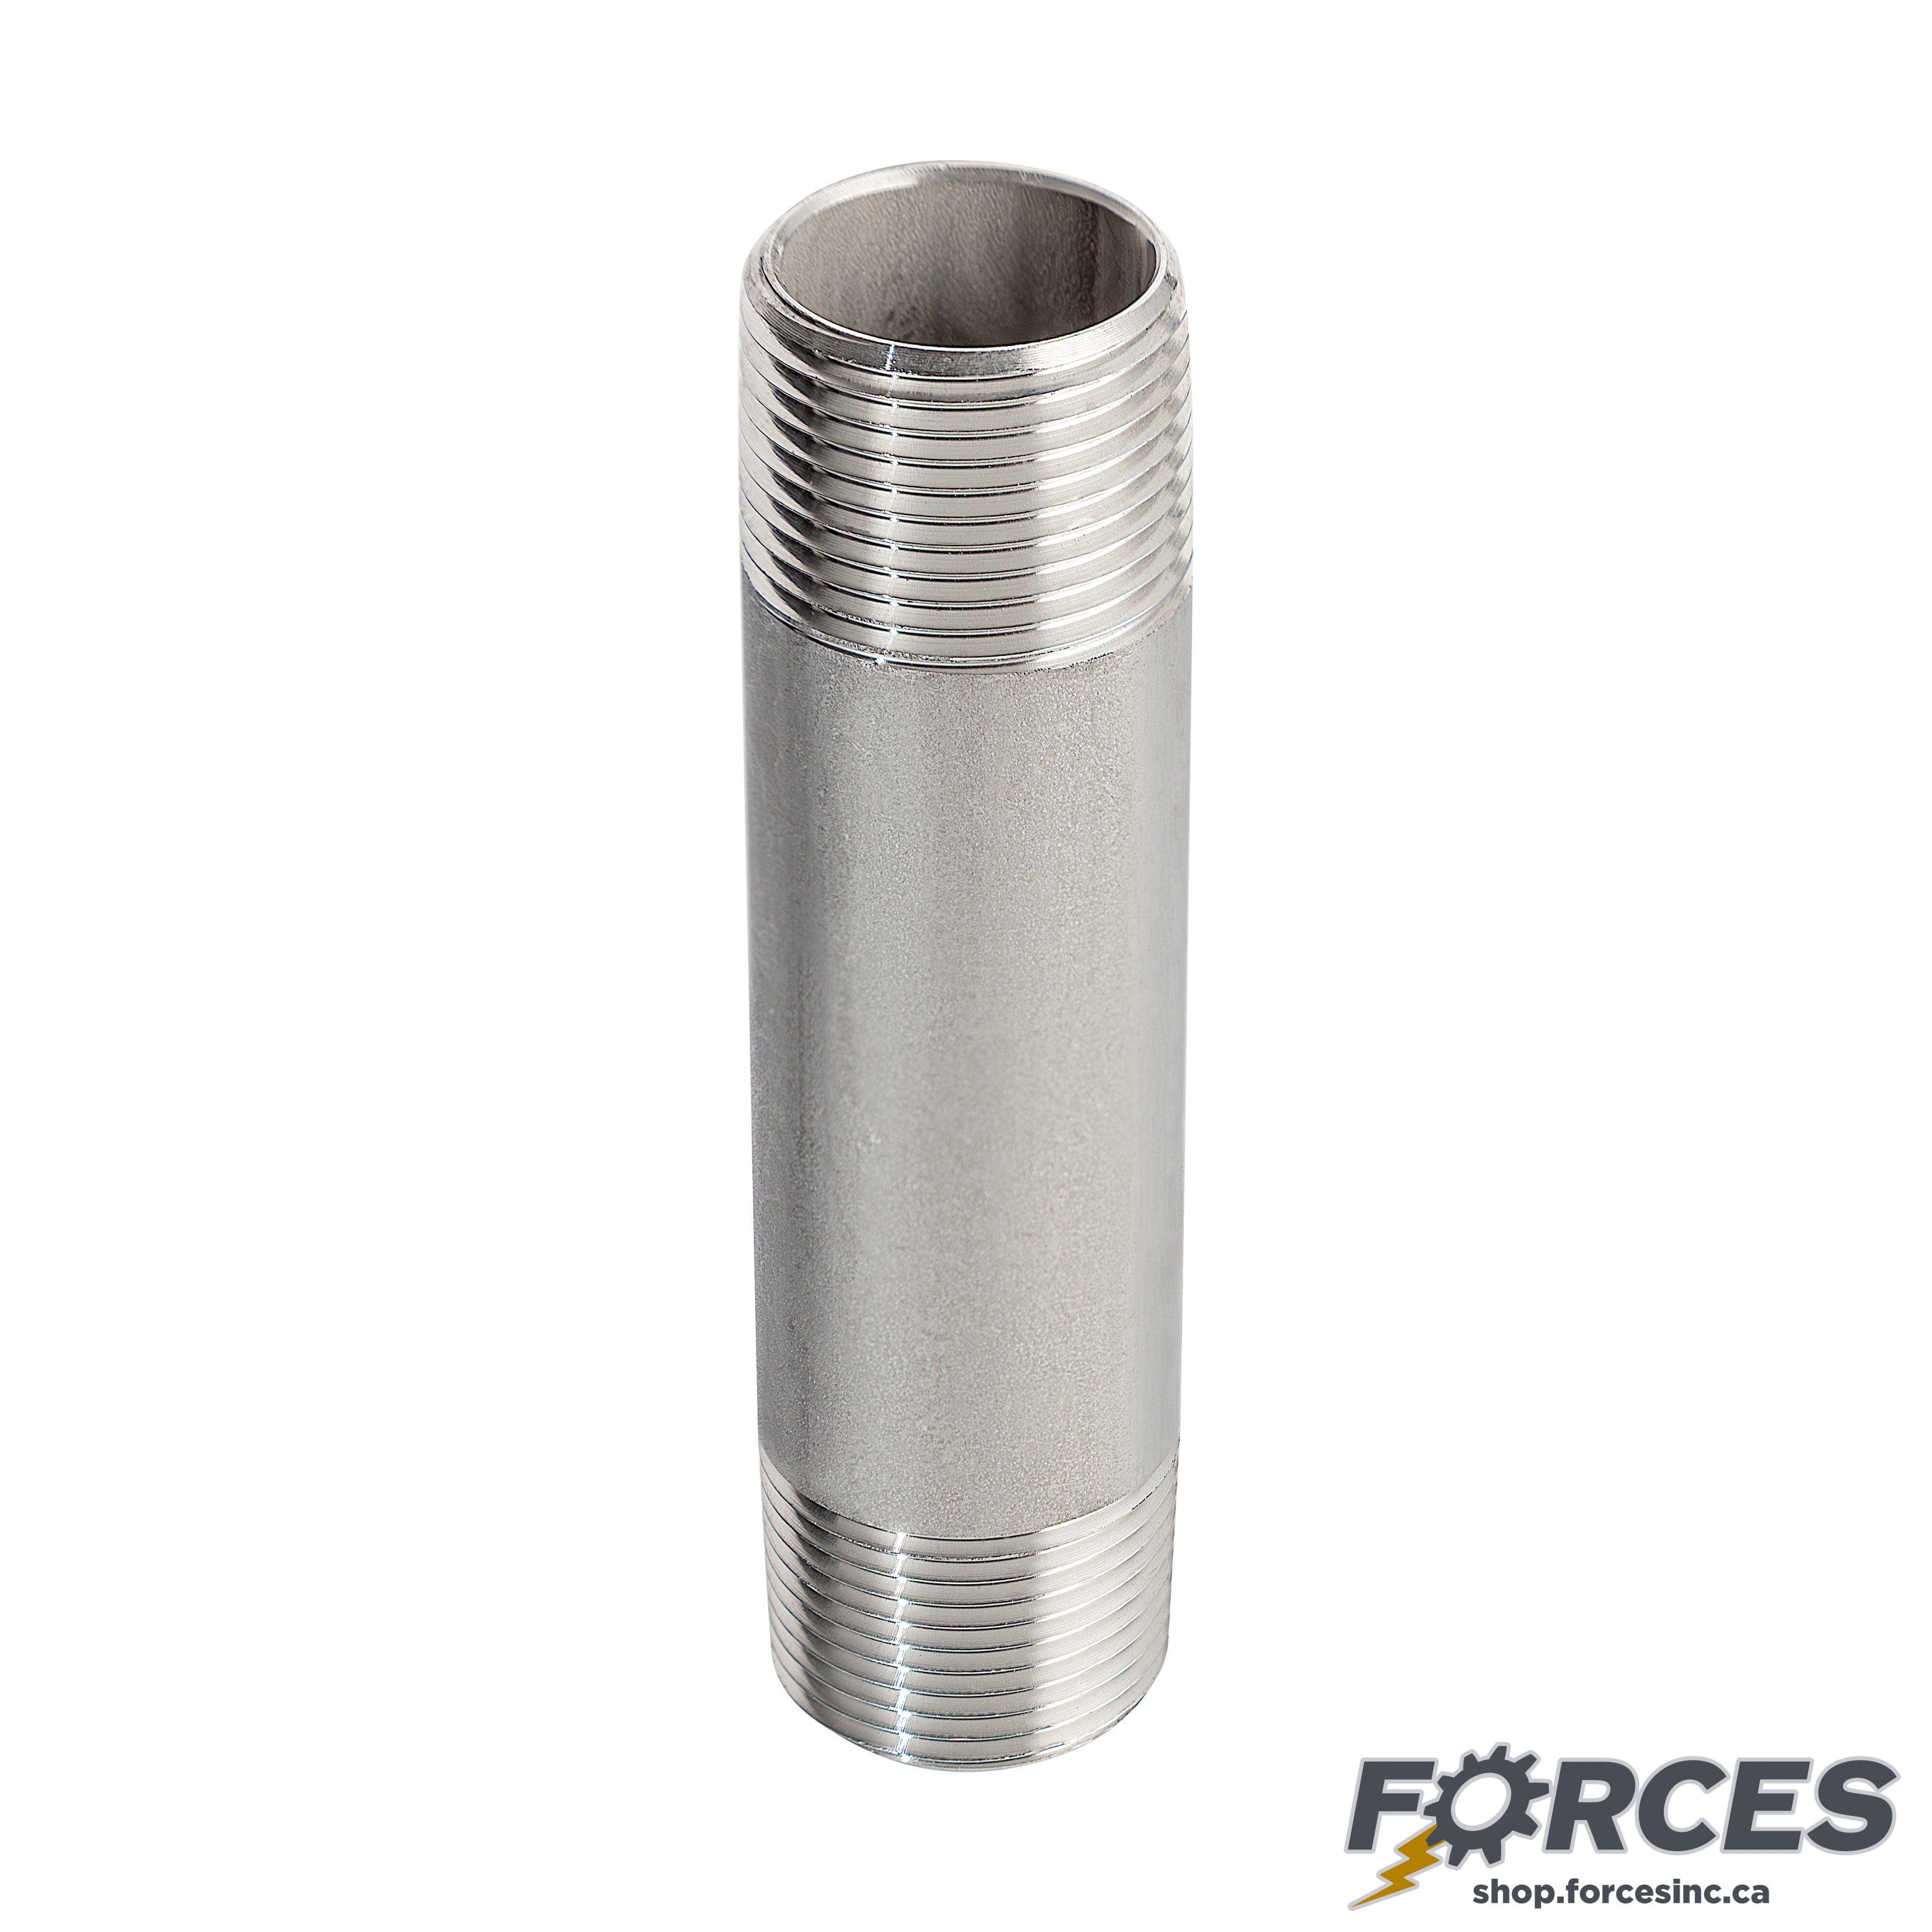 1" X 6" Long Nipple - Stainless Steel 316 - Forces Inc